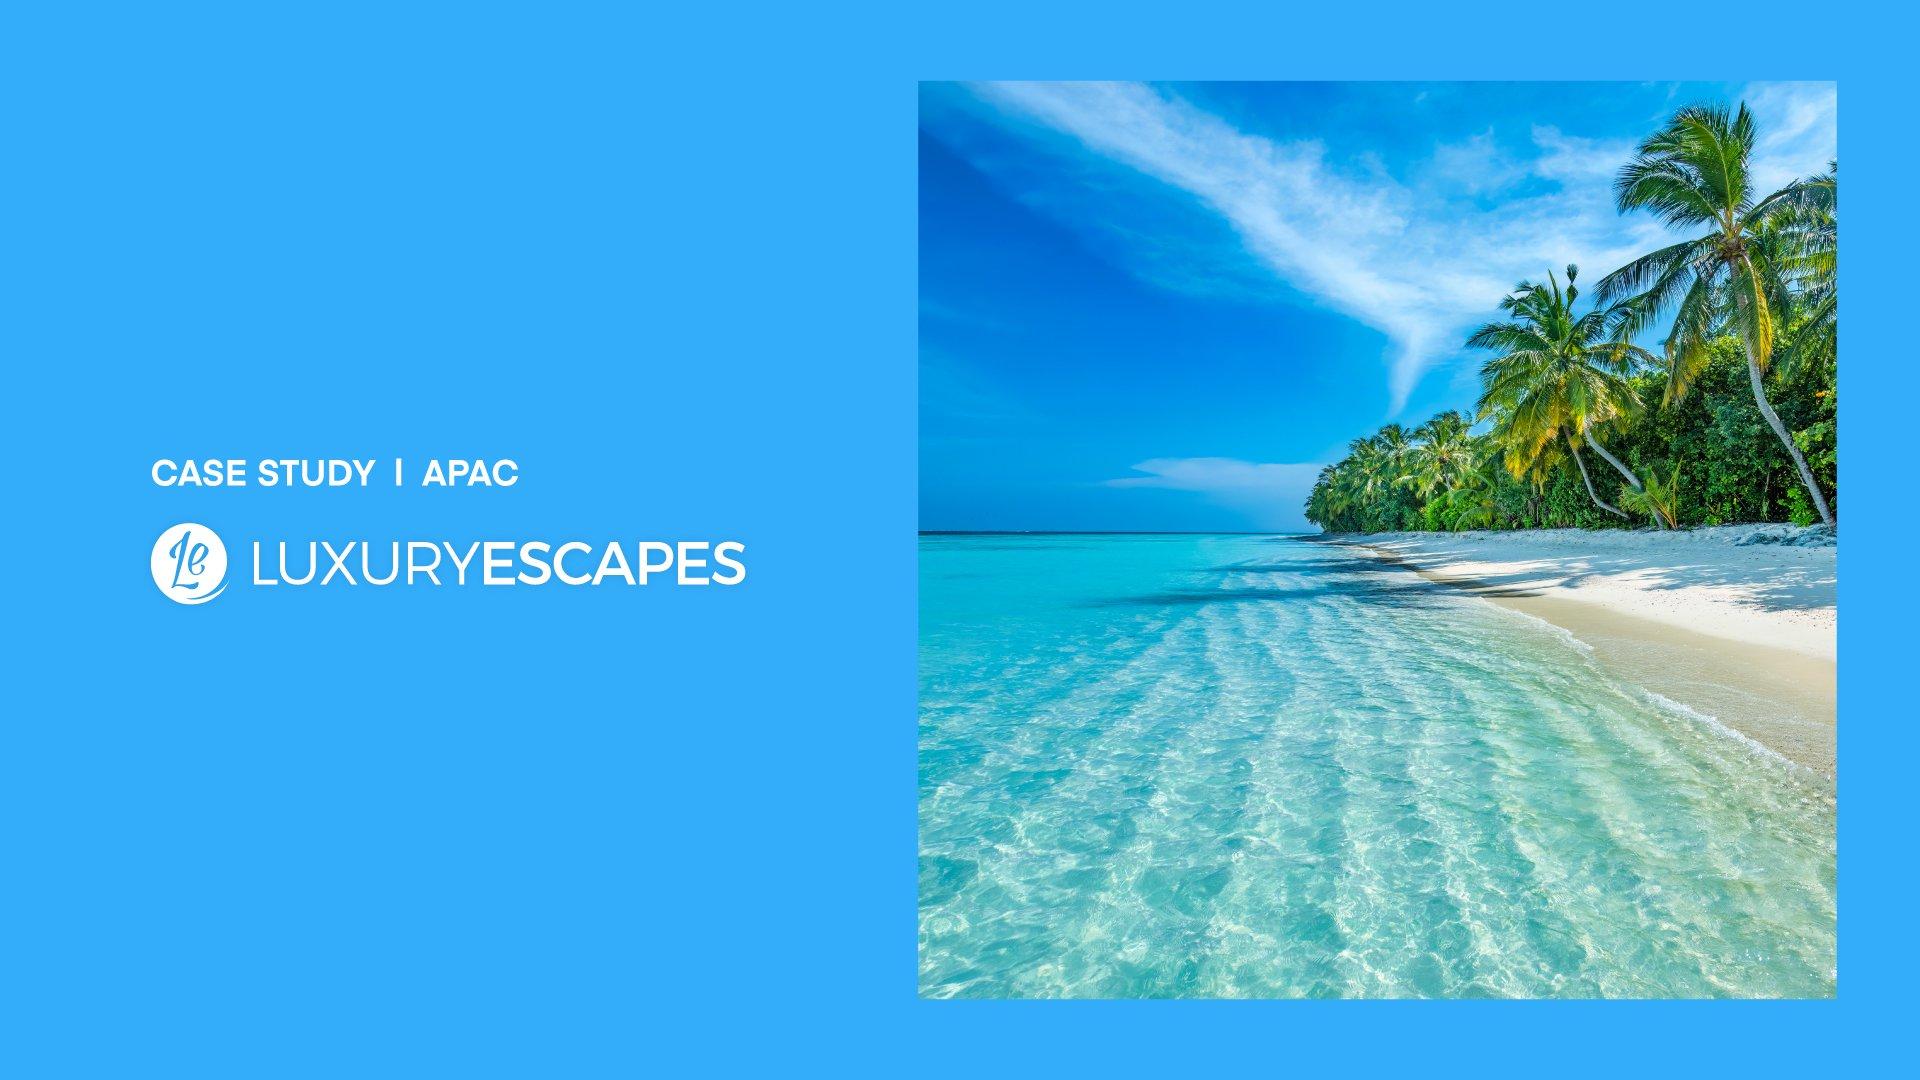 Luxury Escapes and UID2.0 - Case Study Results: Image of palm trees along an ocean